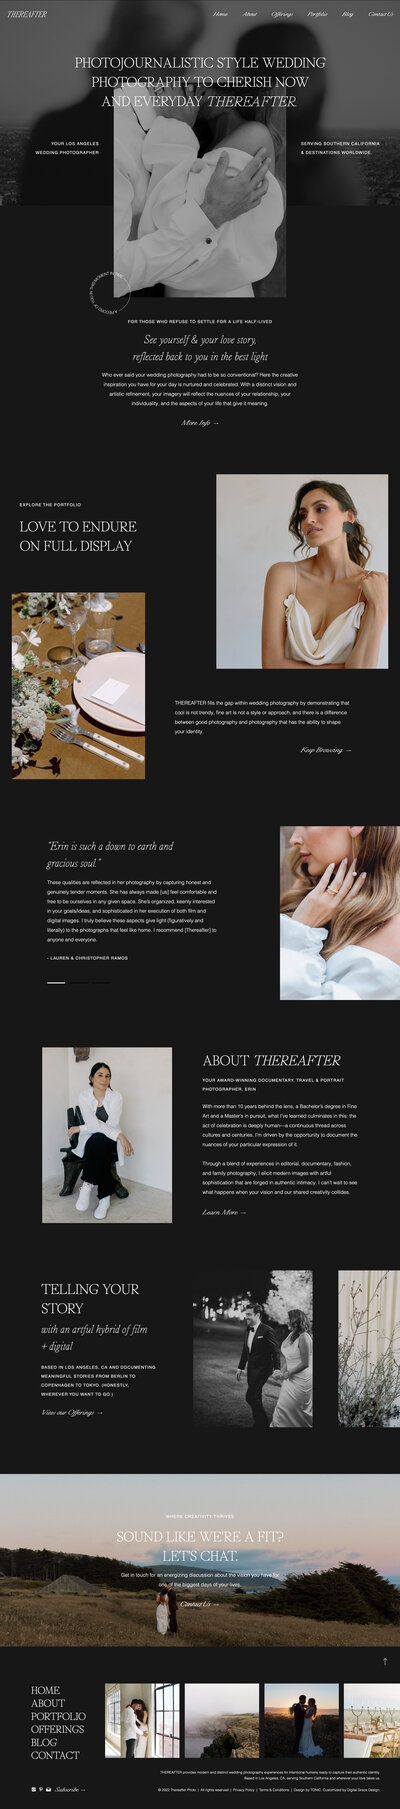 Showit template customization for Thereafter Photo, a Los Angeles wedding photographer